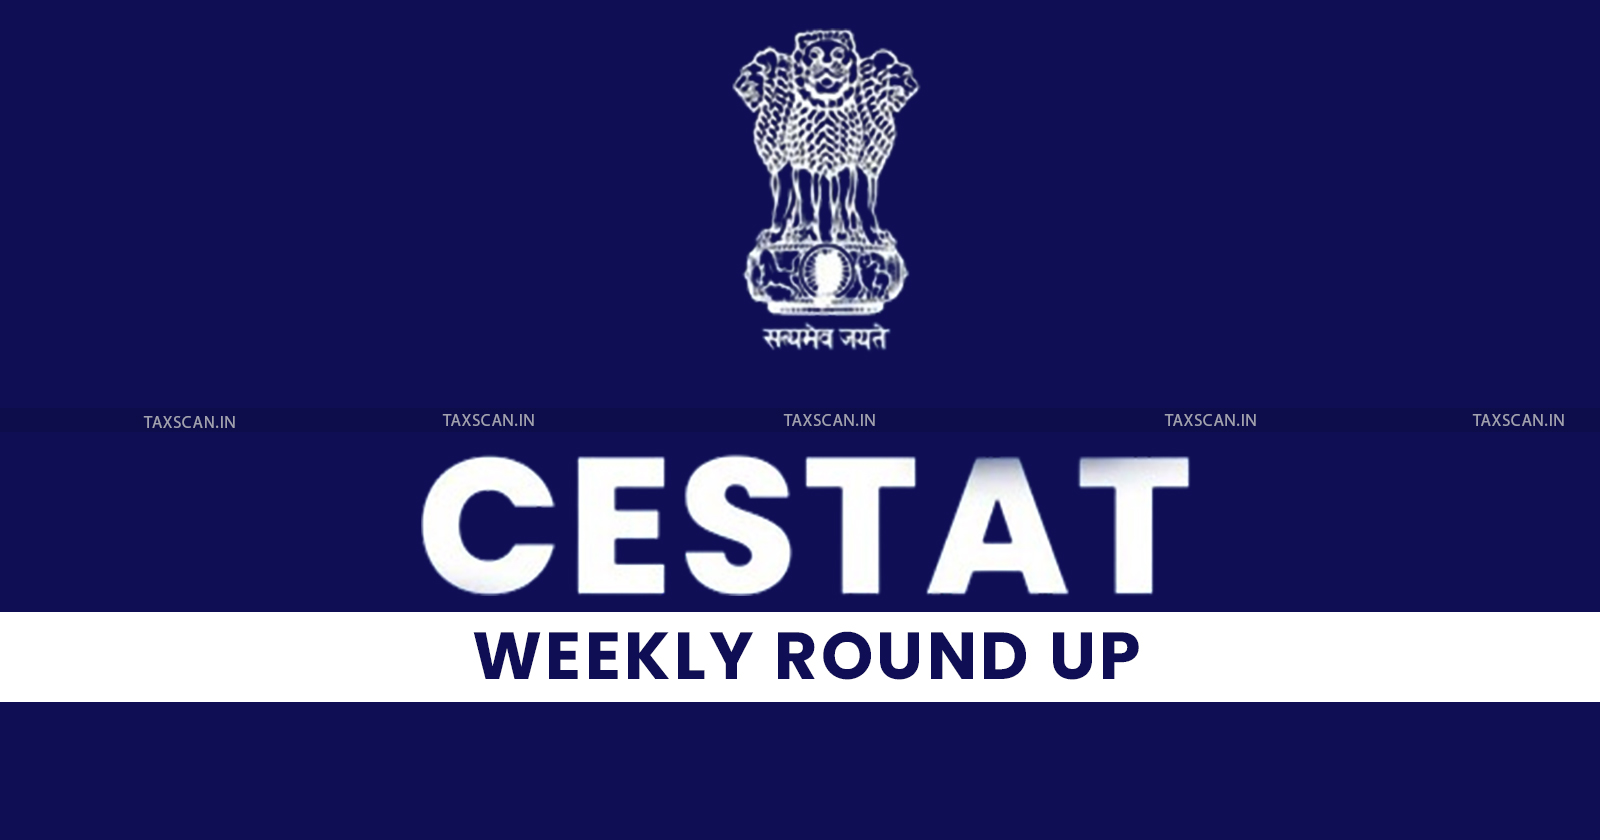 CESTAT News - CESTAT Weekly Round Up - Weekly round up - Taxscan Weekly round up - taxscan